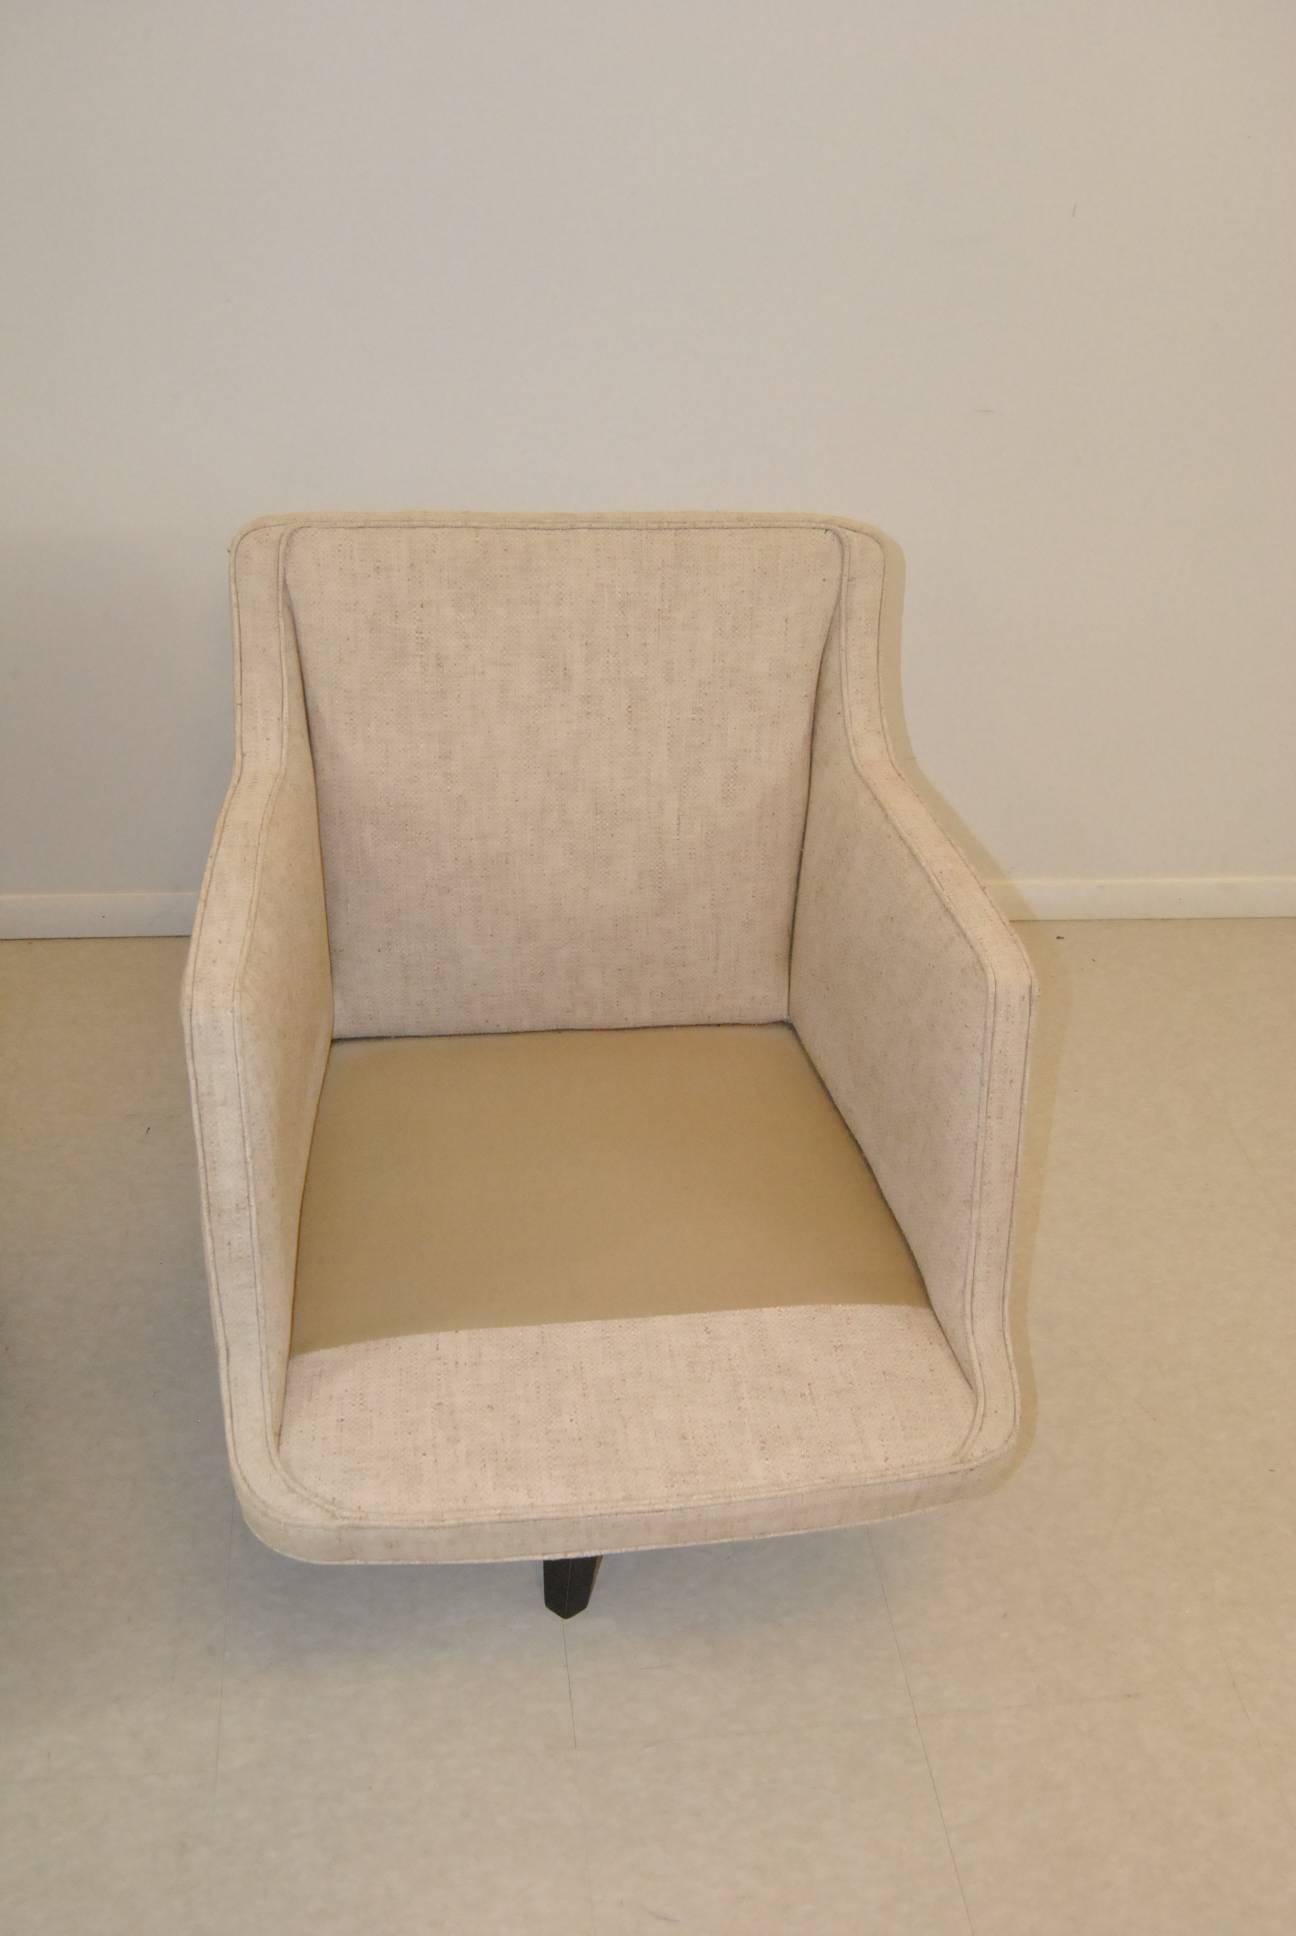 A great pair of Mid-Century Modern armchairs by Dunbar Furniture. These beautiful chairs feature a very pleasant upholstery with removable cushions. They have great look that will bring style and sophistication to any room. Very good condition.